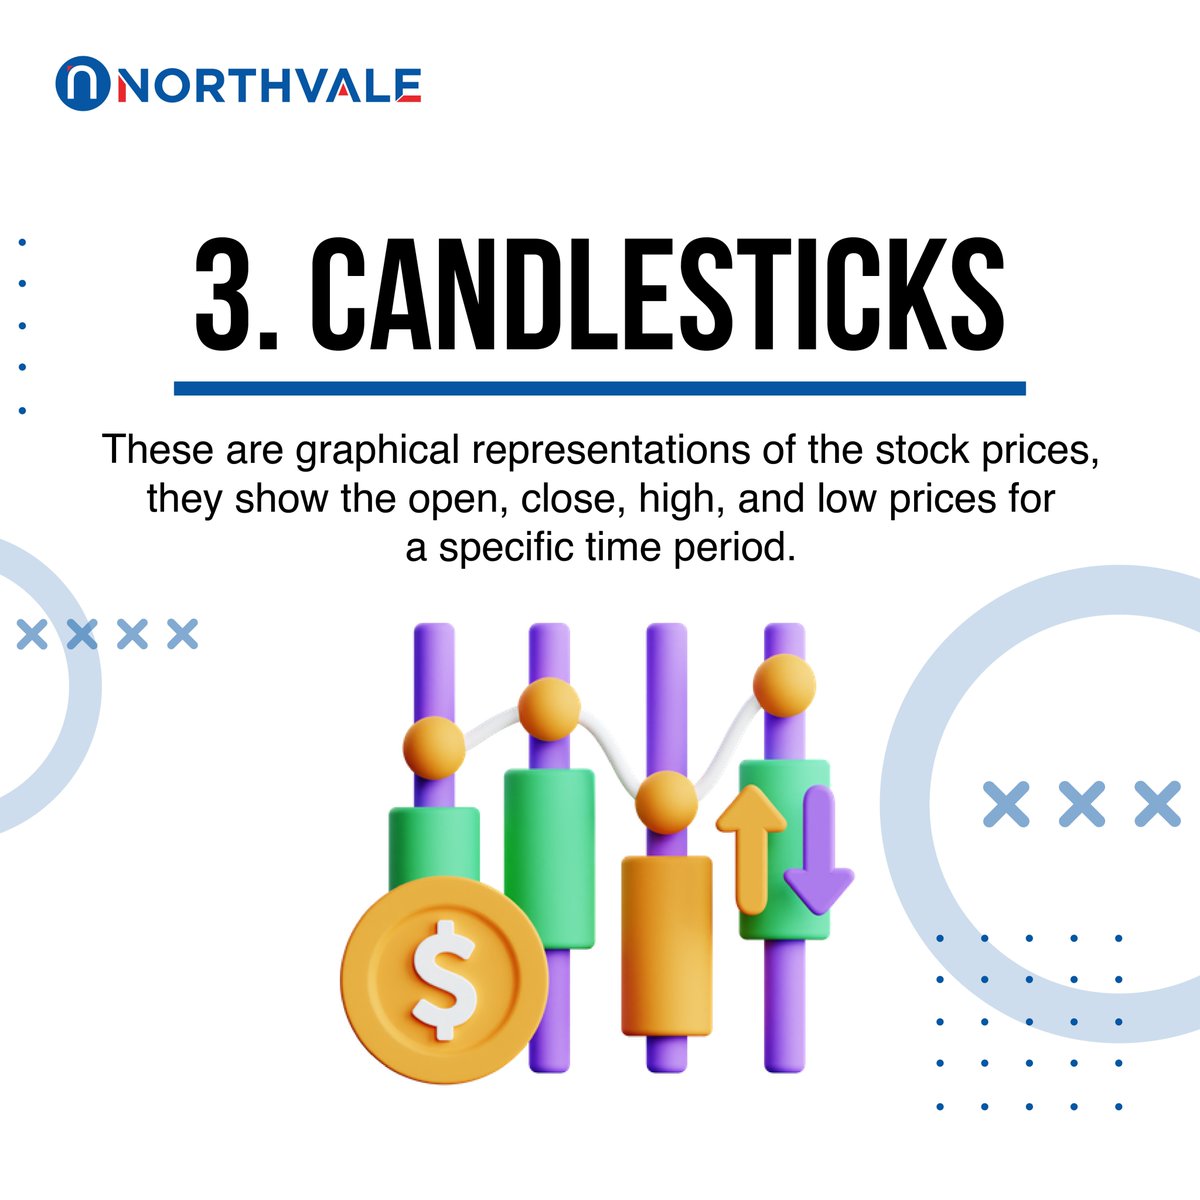 Learn Stock Charts. 

To start trading, join us here: northvale.ae

#Northvale #stockchart #candlesticks #movingaverages #price #time #stockmarket #trading #charts #financialeducation #trading101